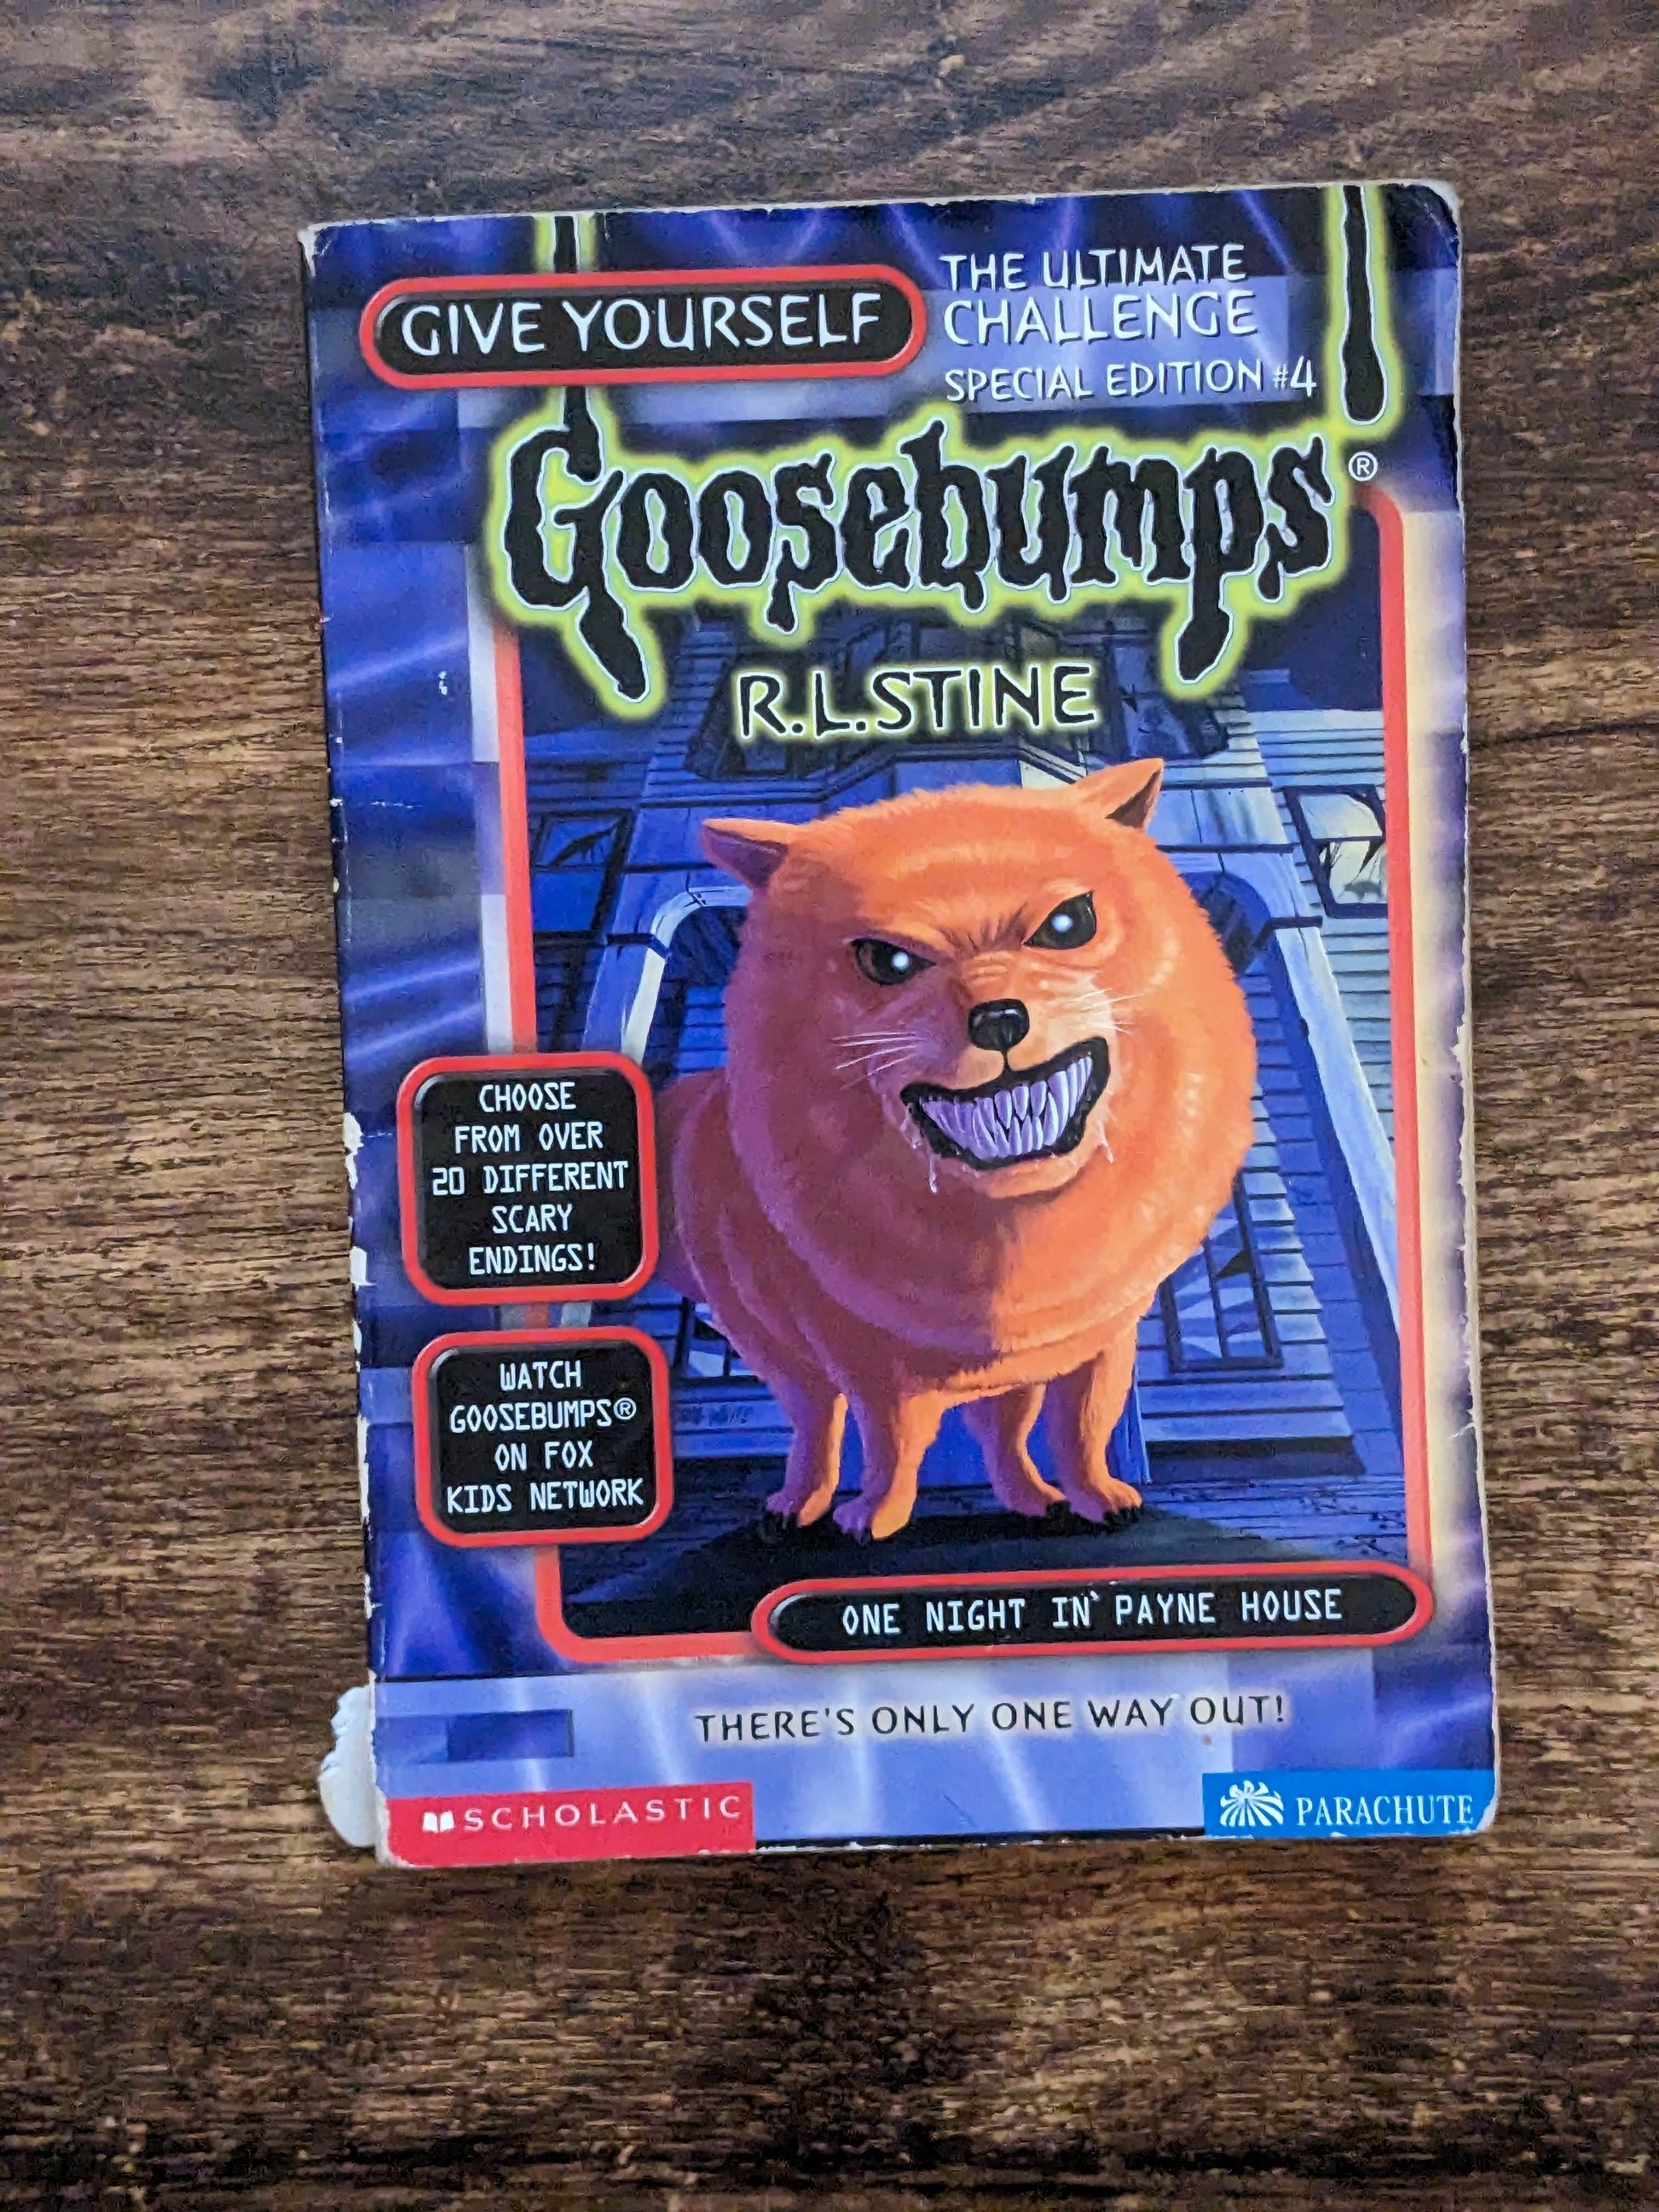 One Night in Payne House (Give Yourself Goosebumps Special Edition #4) R. L. Stine - Asylum Books